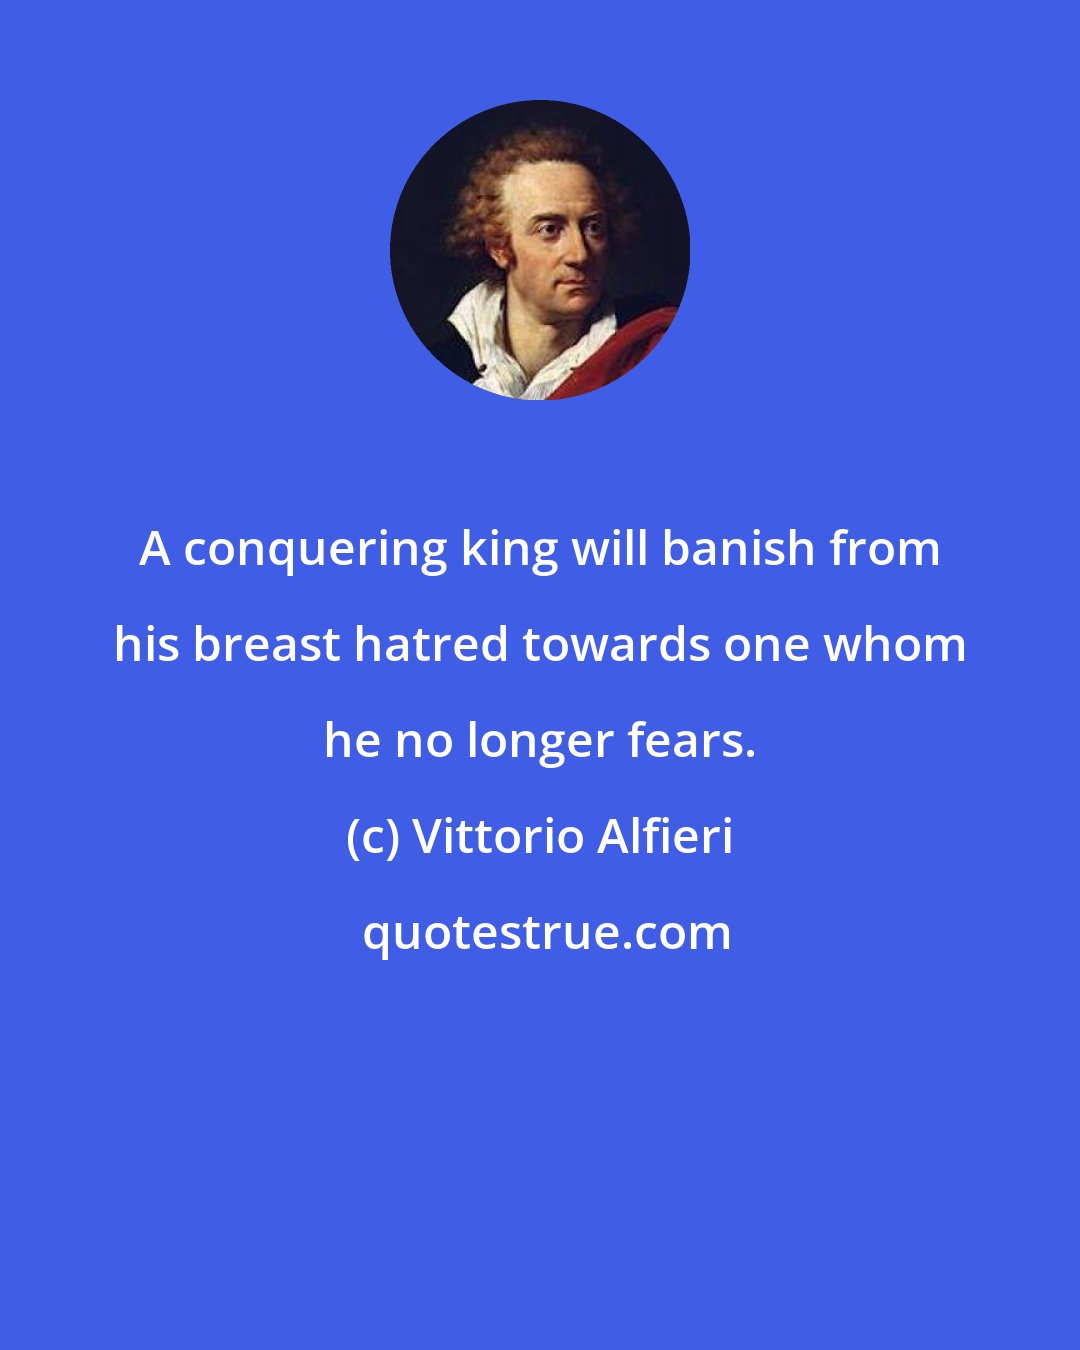 Vittorio Alfieri: A conquering king will banish from his breast hatred towards one whom he no longer fears.